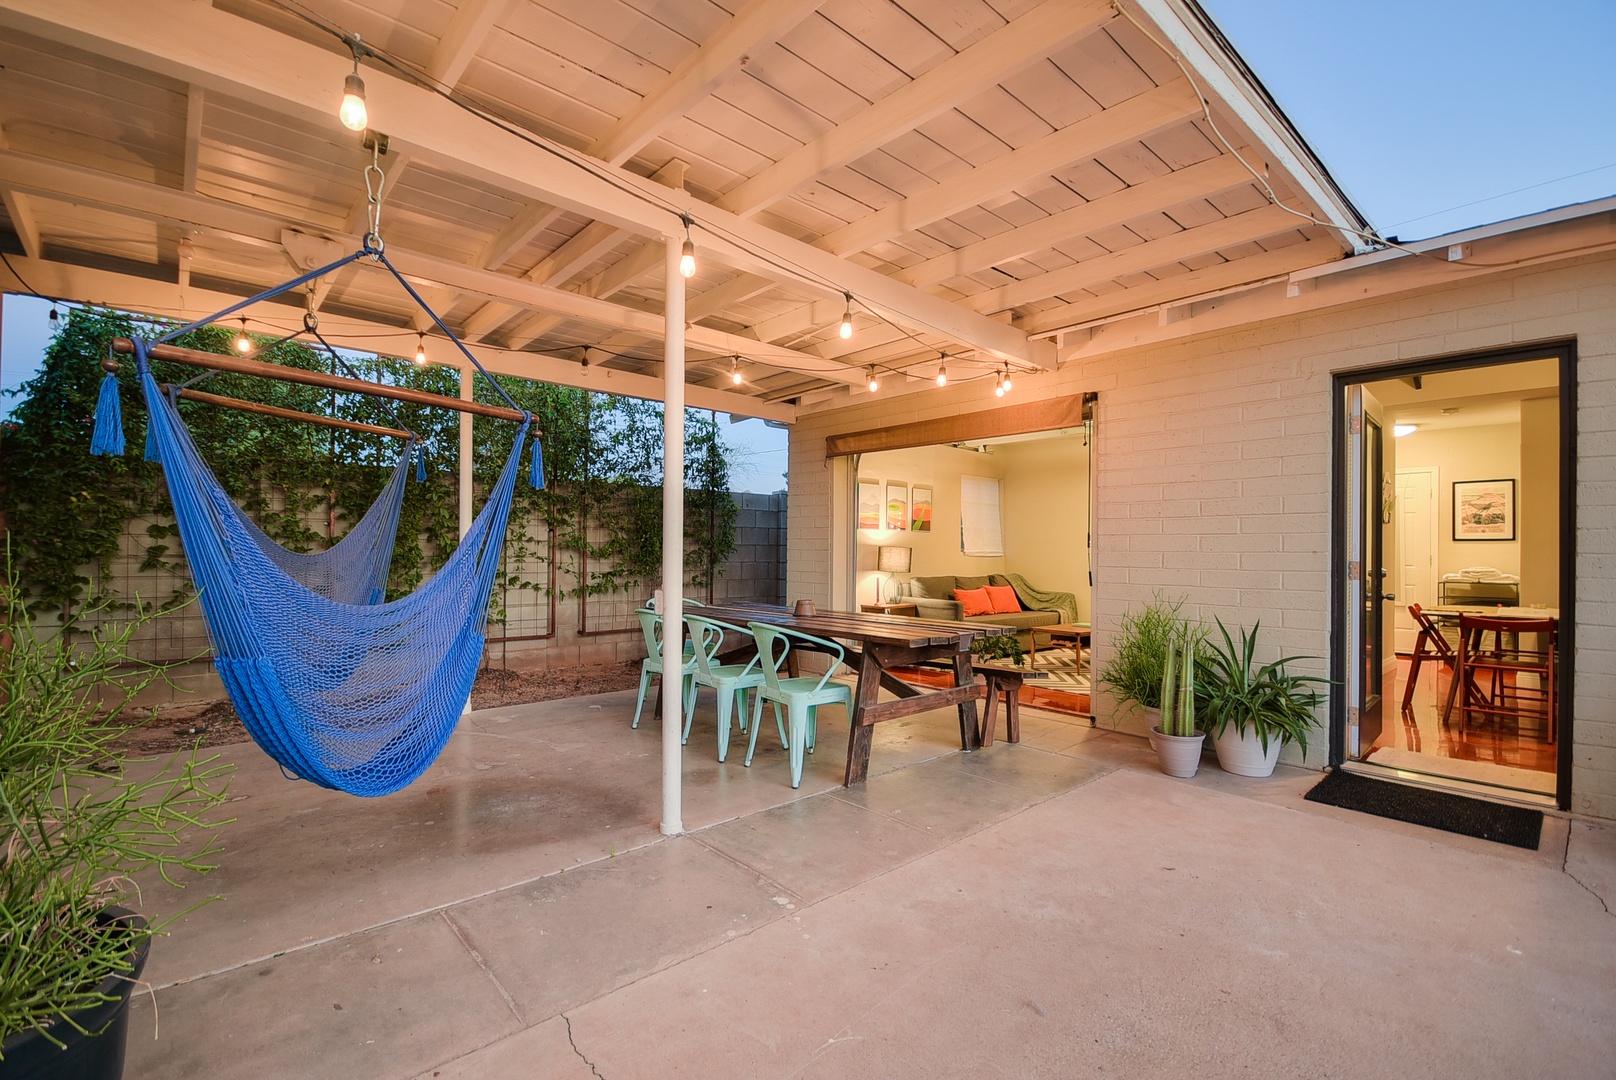 Unwind Arizona-style by opening the glass door and enjoying fresh air and cool vibes under the lights.